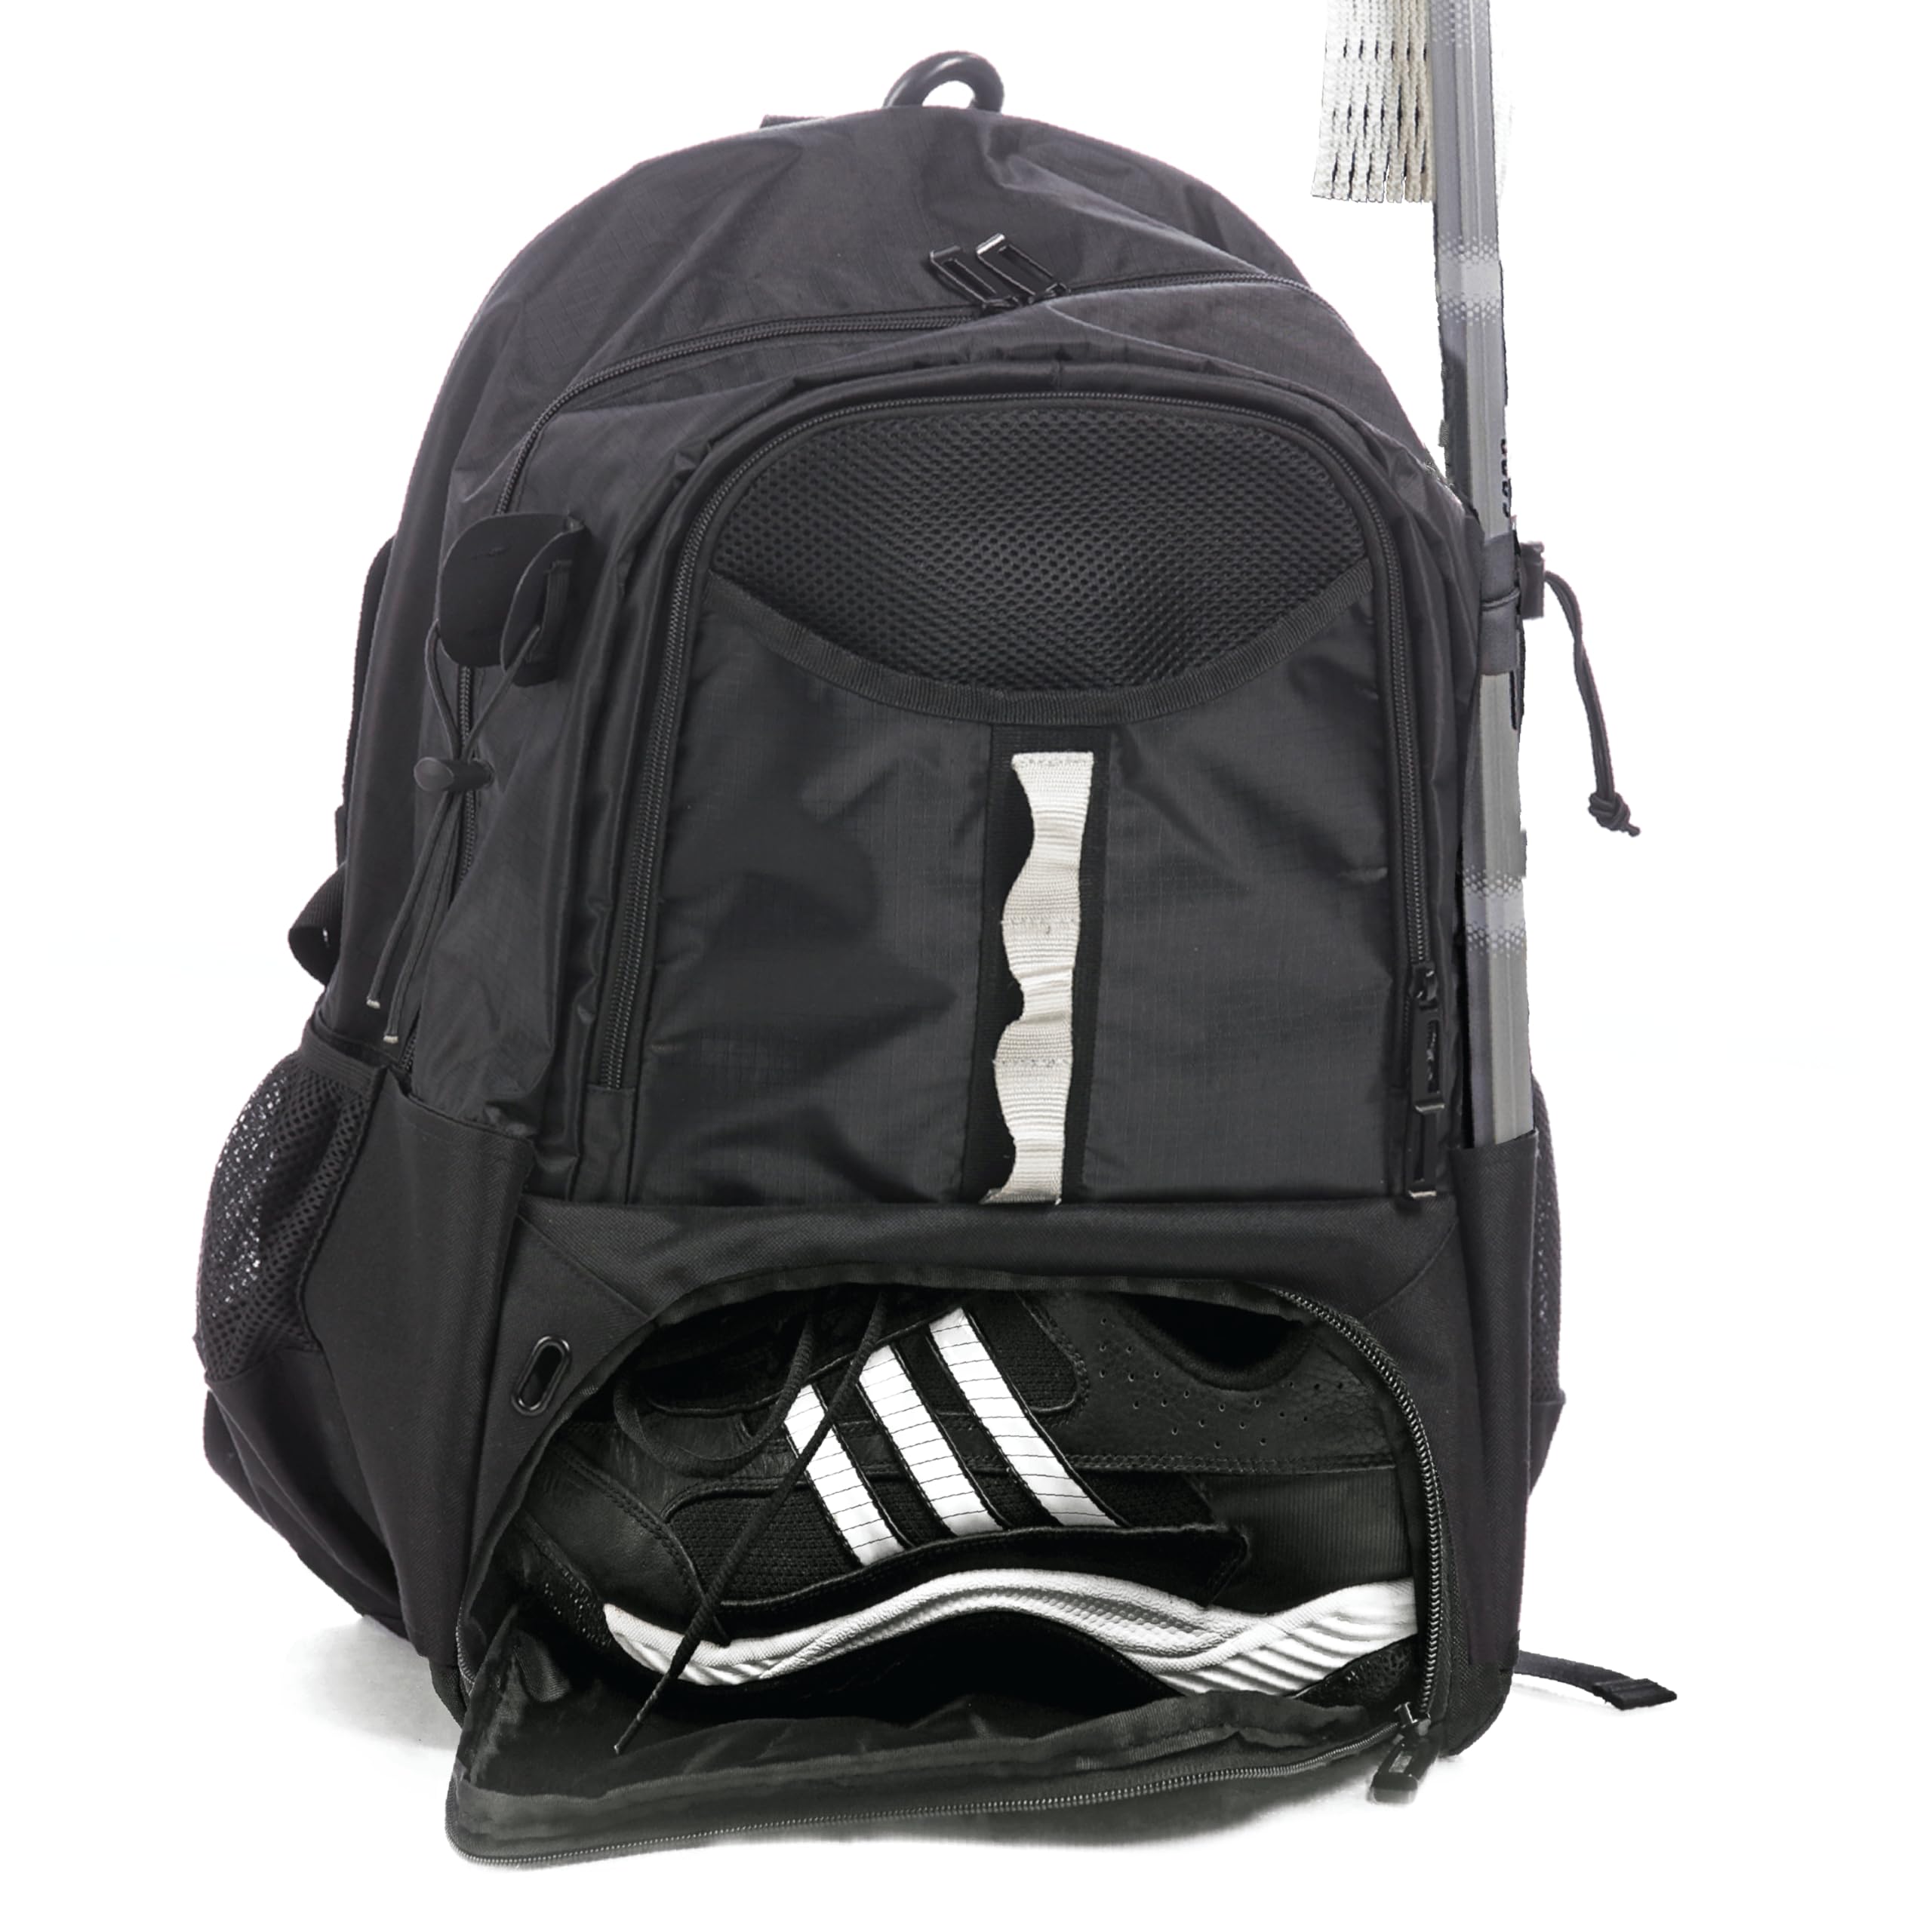 Athletico Turf Lacrosse Bag - Extra Large Lacrosse Backpack - Holds All Lacrosse or Field Hockey Equipment - Two Stick Holders and Separate Cleats Compartment  - Like New